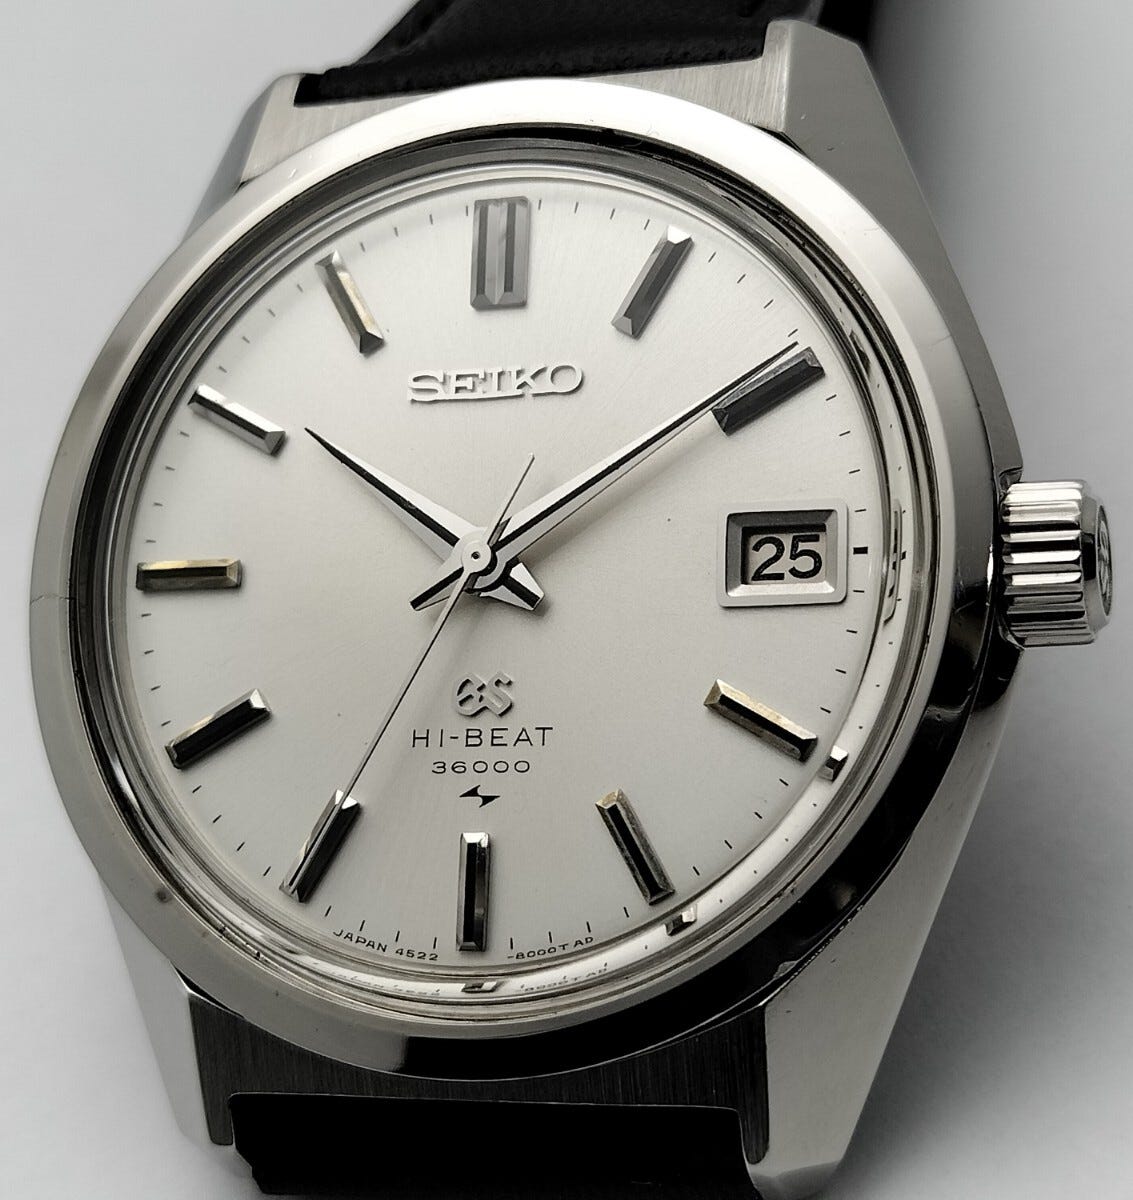 You're going to need a bigger boat - the Grand Seiko guy